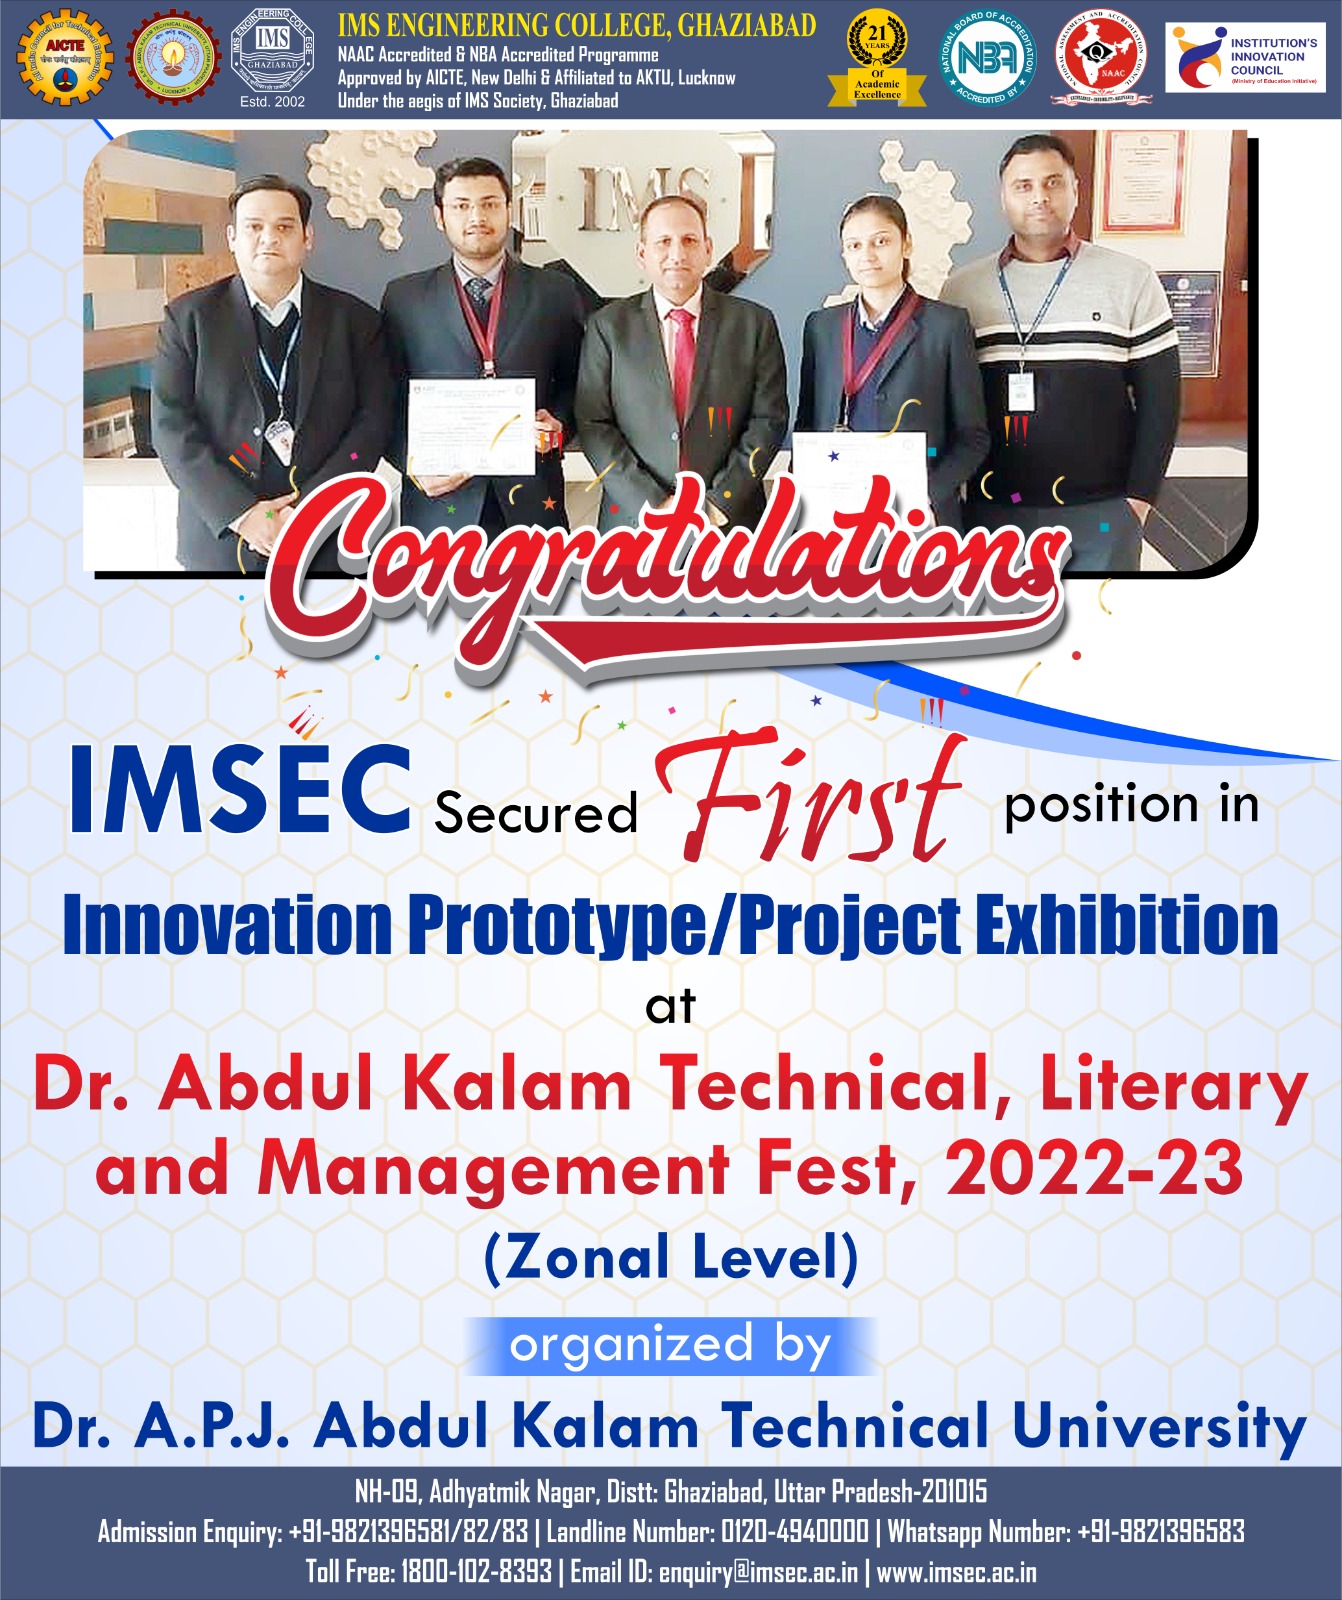 IMSEC secured first position in Innovation prototype/ Project Exhibition event at zonal level